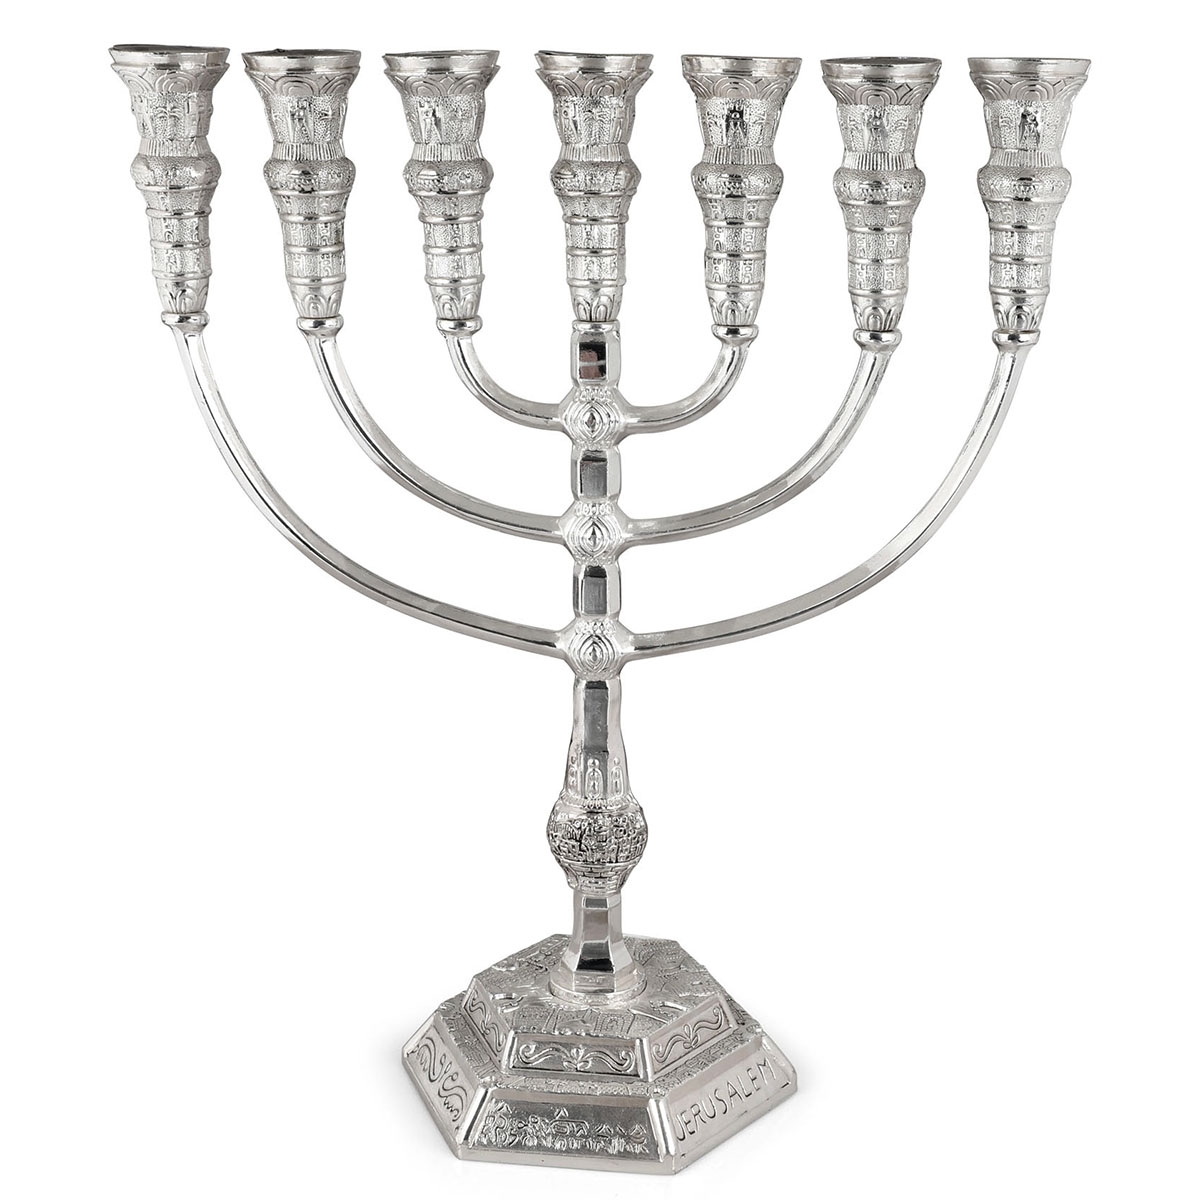 Extra Large Silver-Plated Jerusalem Temple 7-Branched Menorah - 1